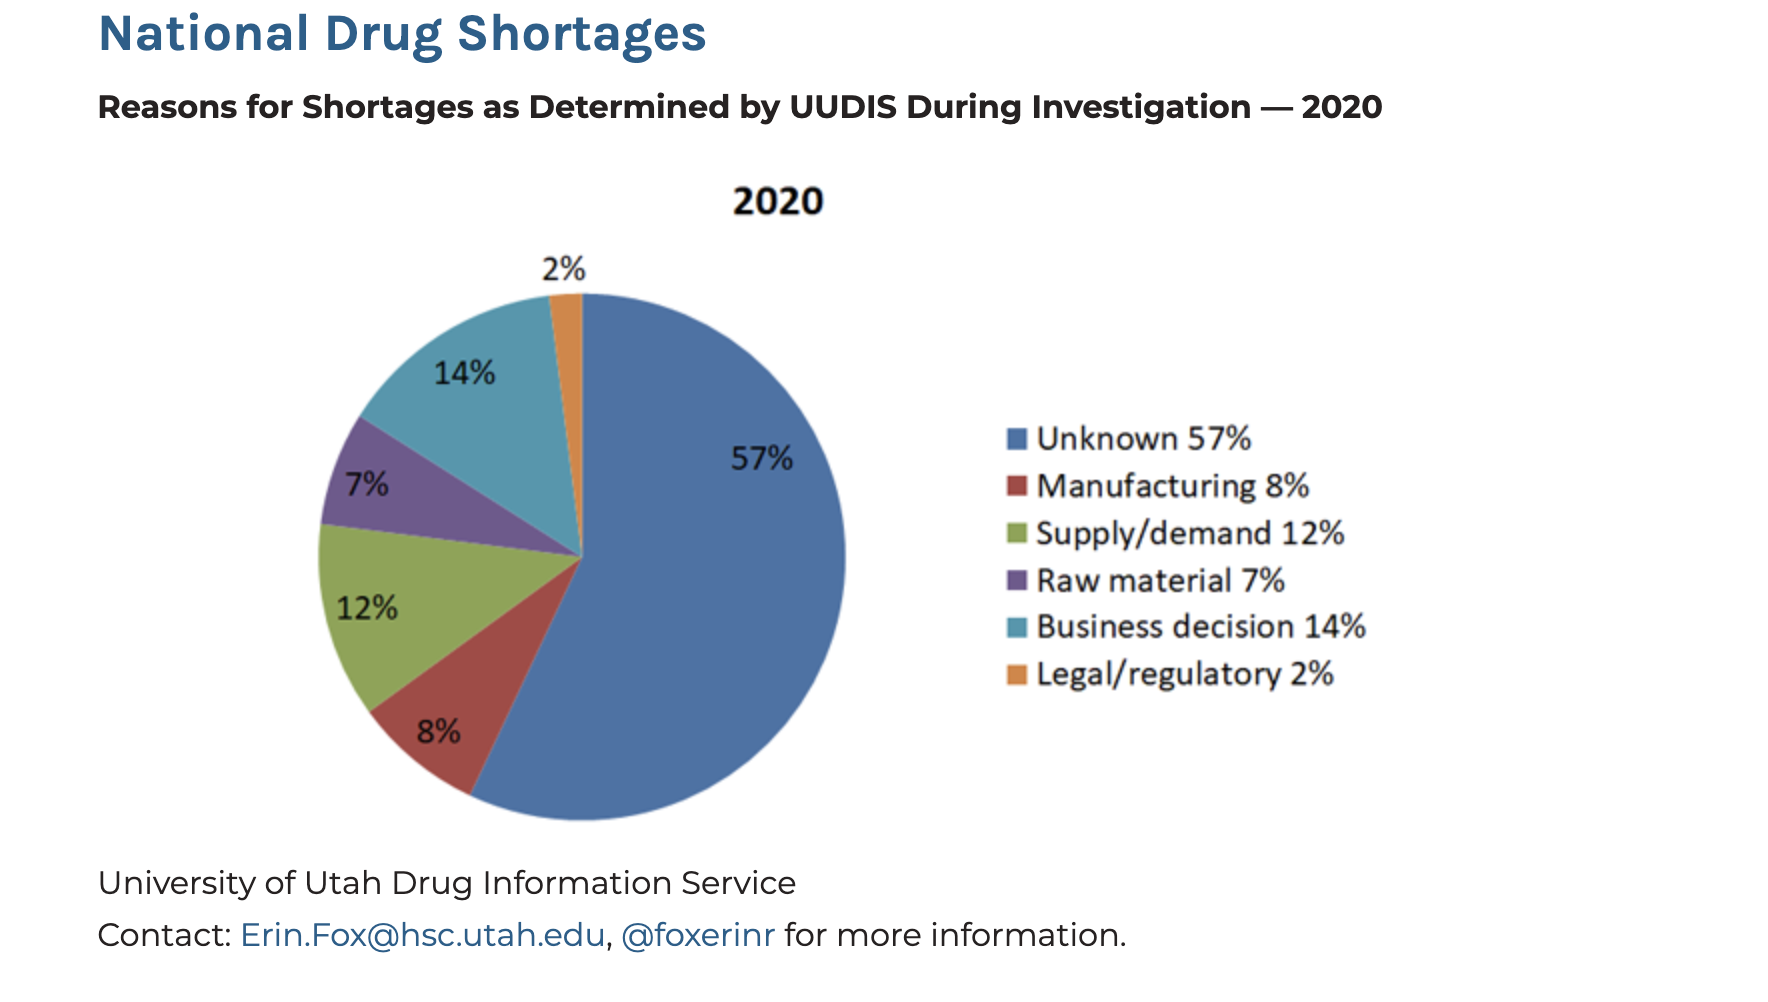 Graph showing the reasons for Shortages